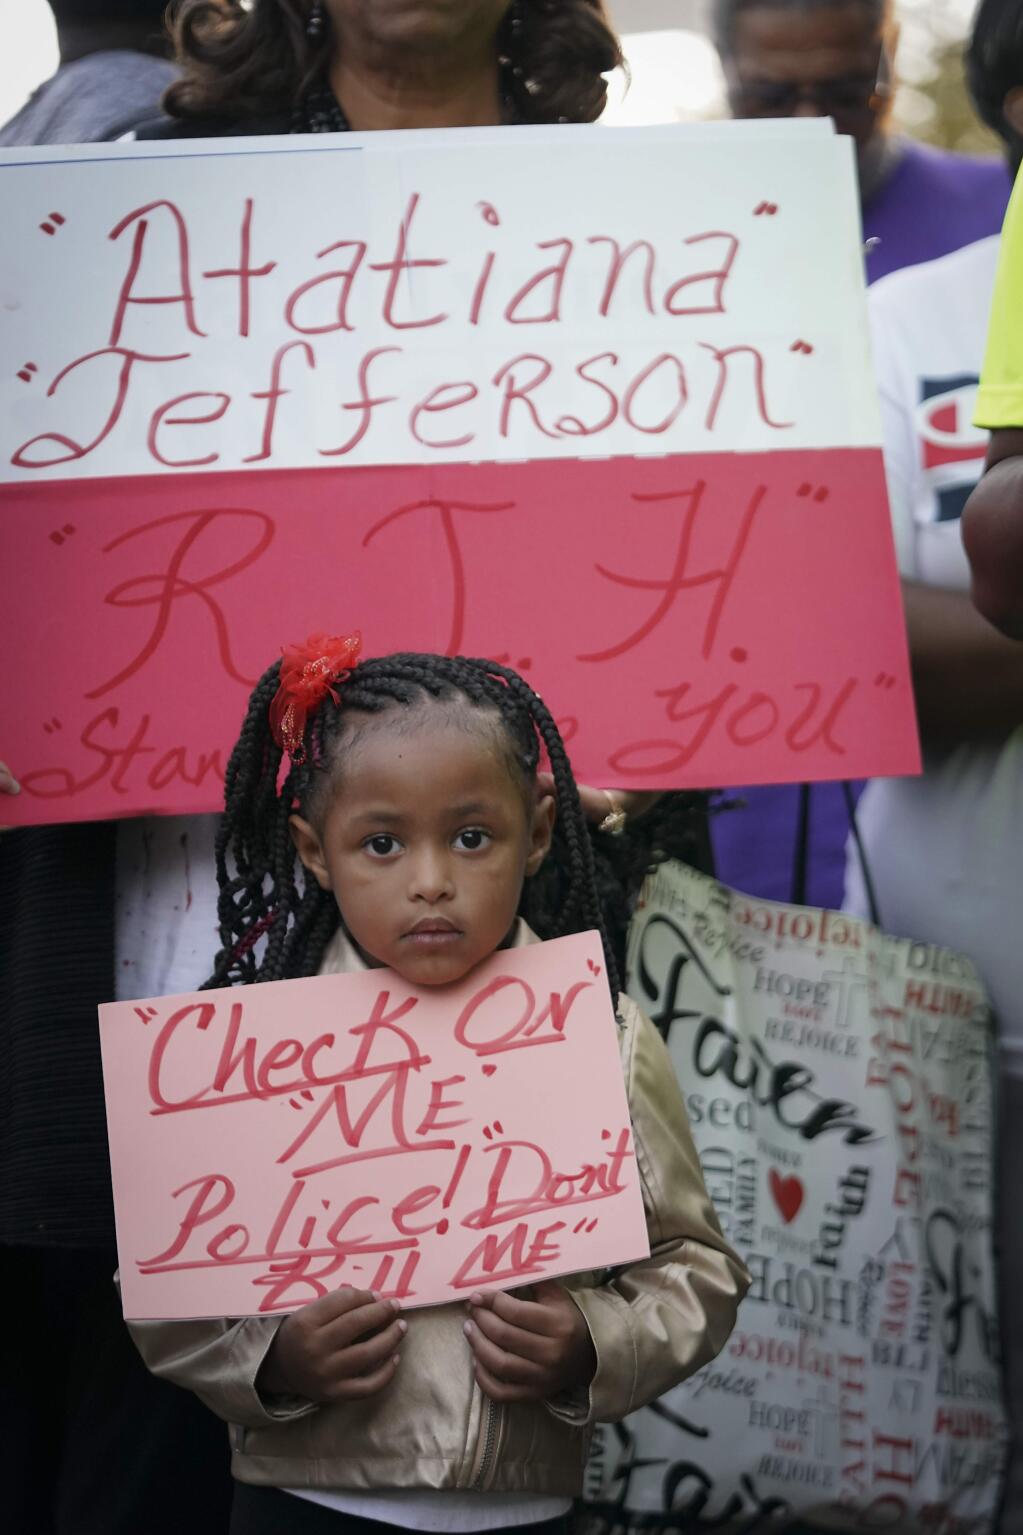 Trinity Ford, 4, joins the crowd gathered during a community vigil for Atatiana Jefferson on Sunday, Oct. 13, 2019, in Fort Worth, Texas. A white police officer who killed the black woman inside her Texas home while responding to a neighbor's call about an open front door 'didn't have time to perceive a threat' before he opened fire, an attorney for Jefferson's family said. (Smiley N. Pool/The Dallas Morning News via AP)